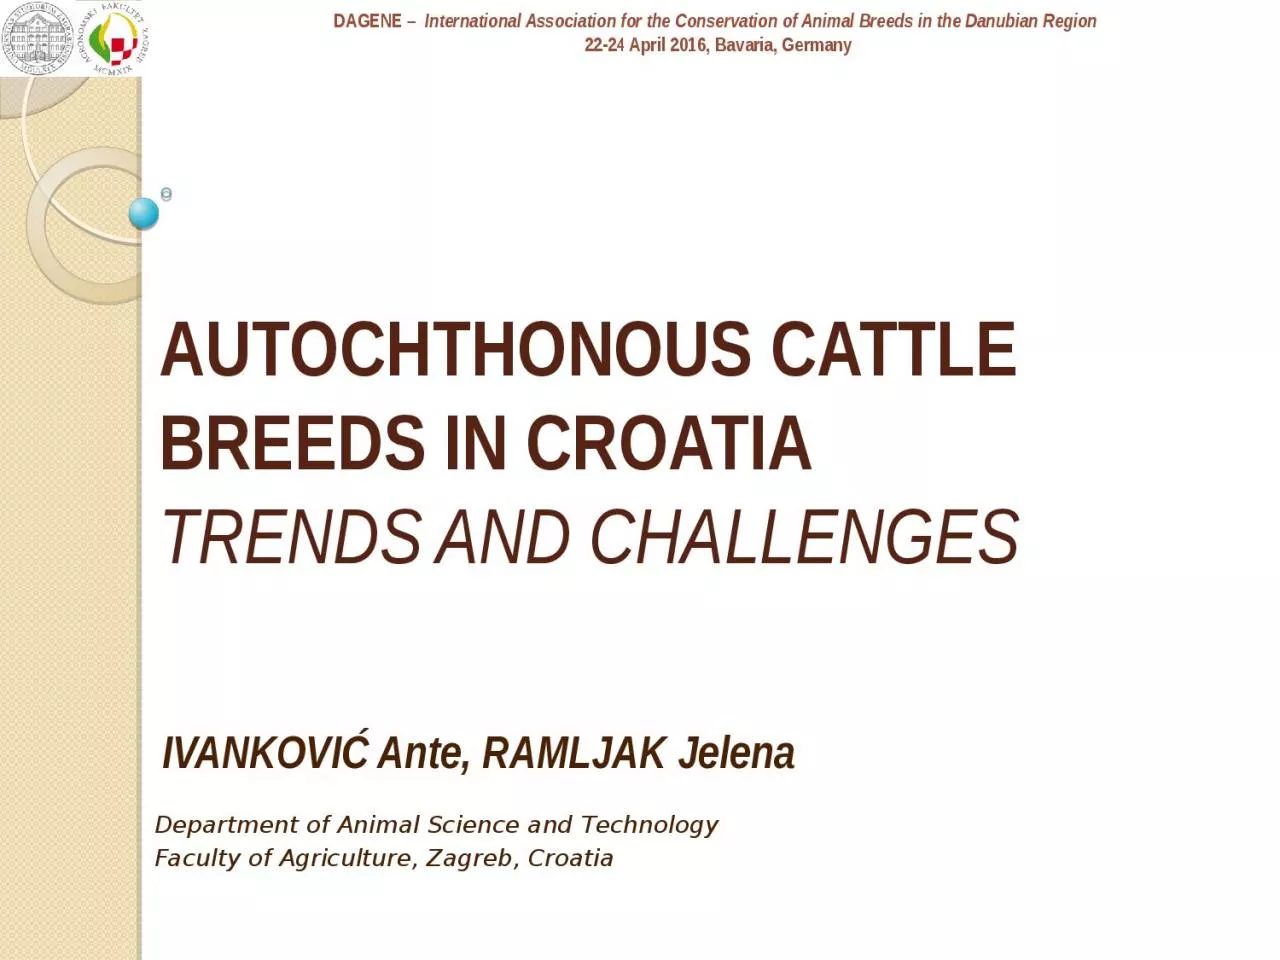 AUTOCHTHONOUS CATTLE BREEDS IN CROATIA